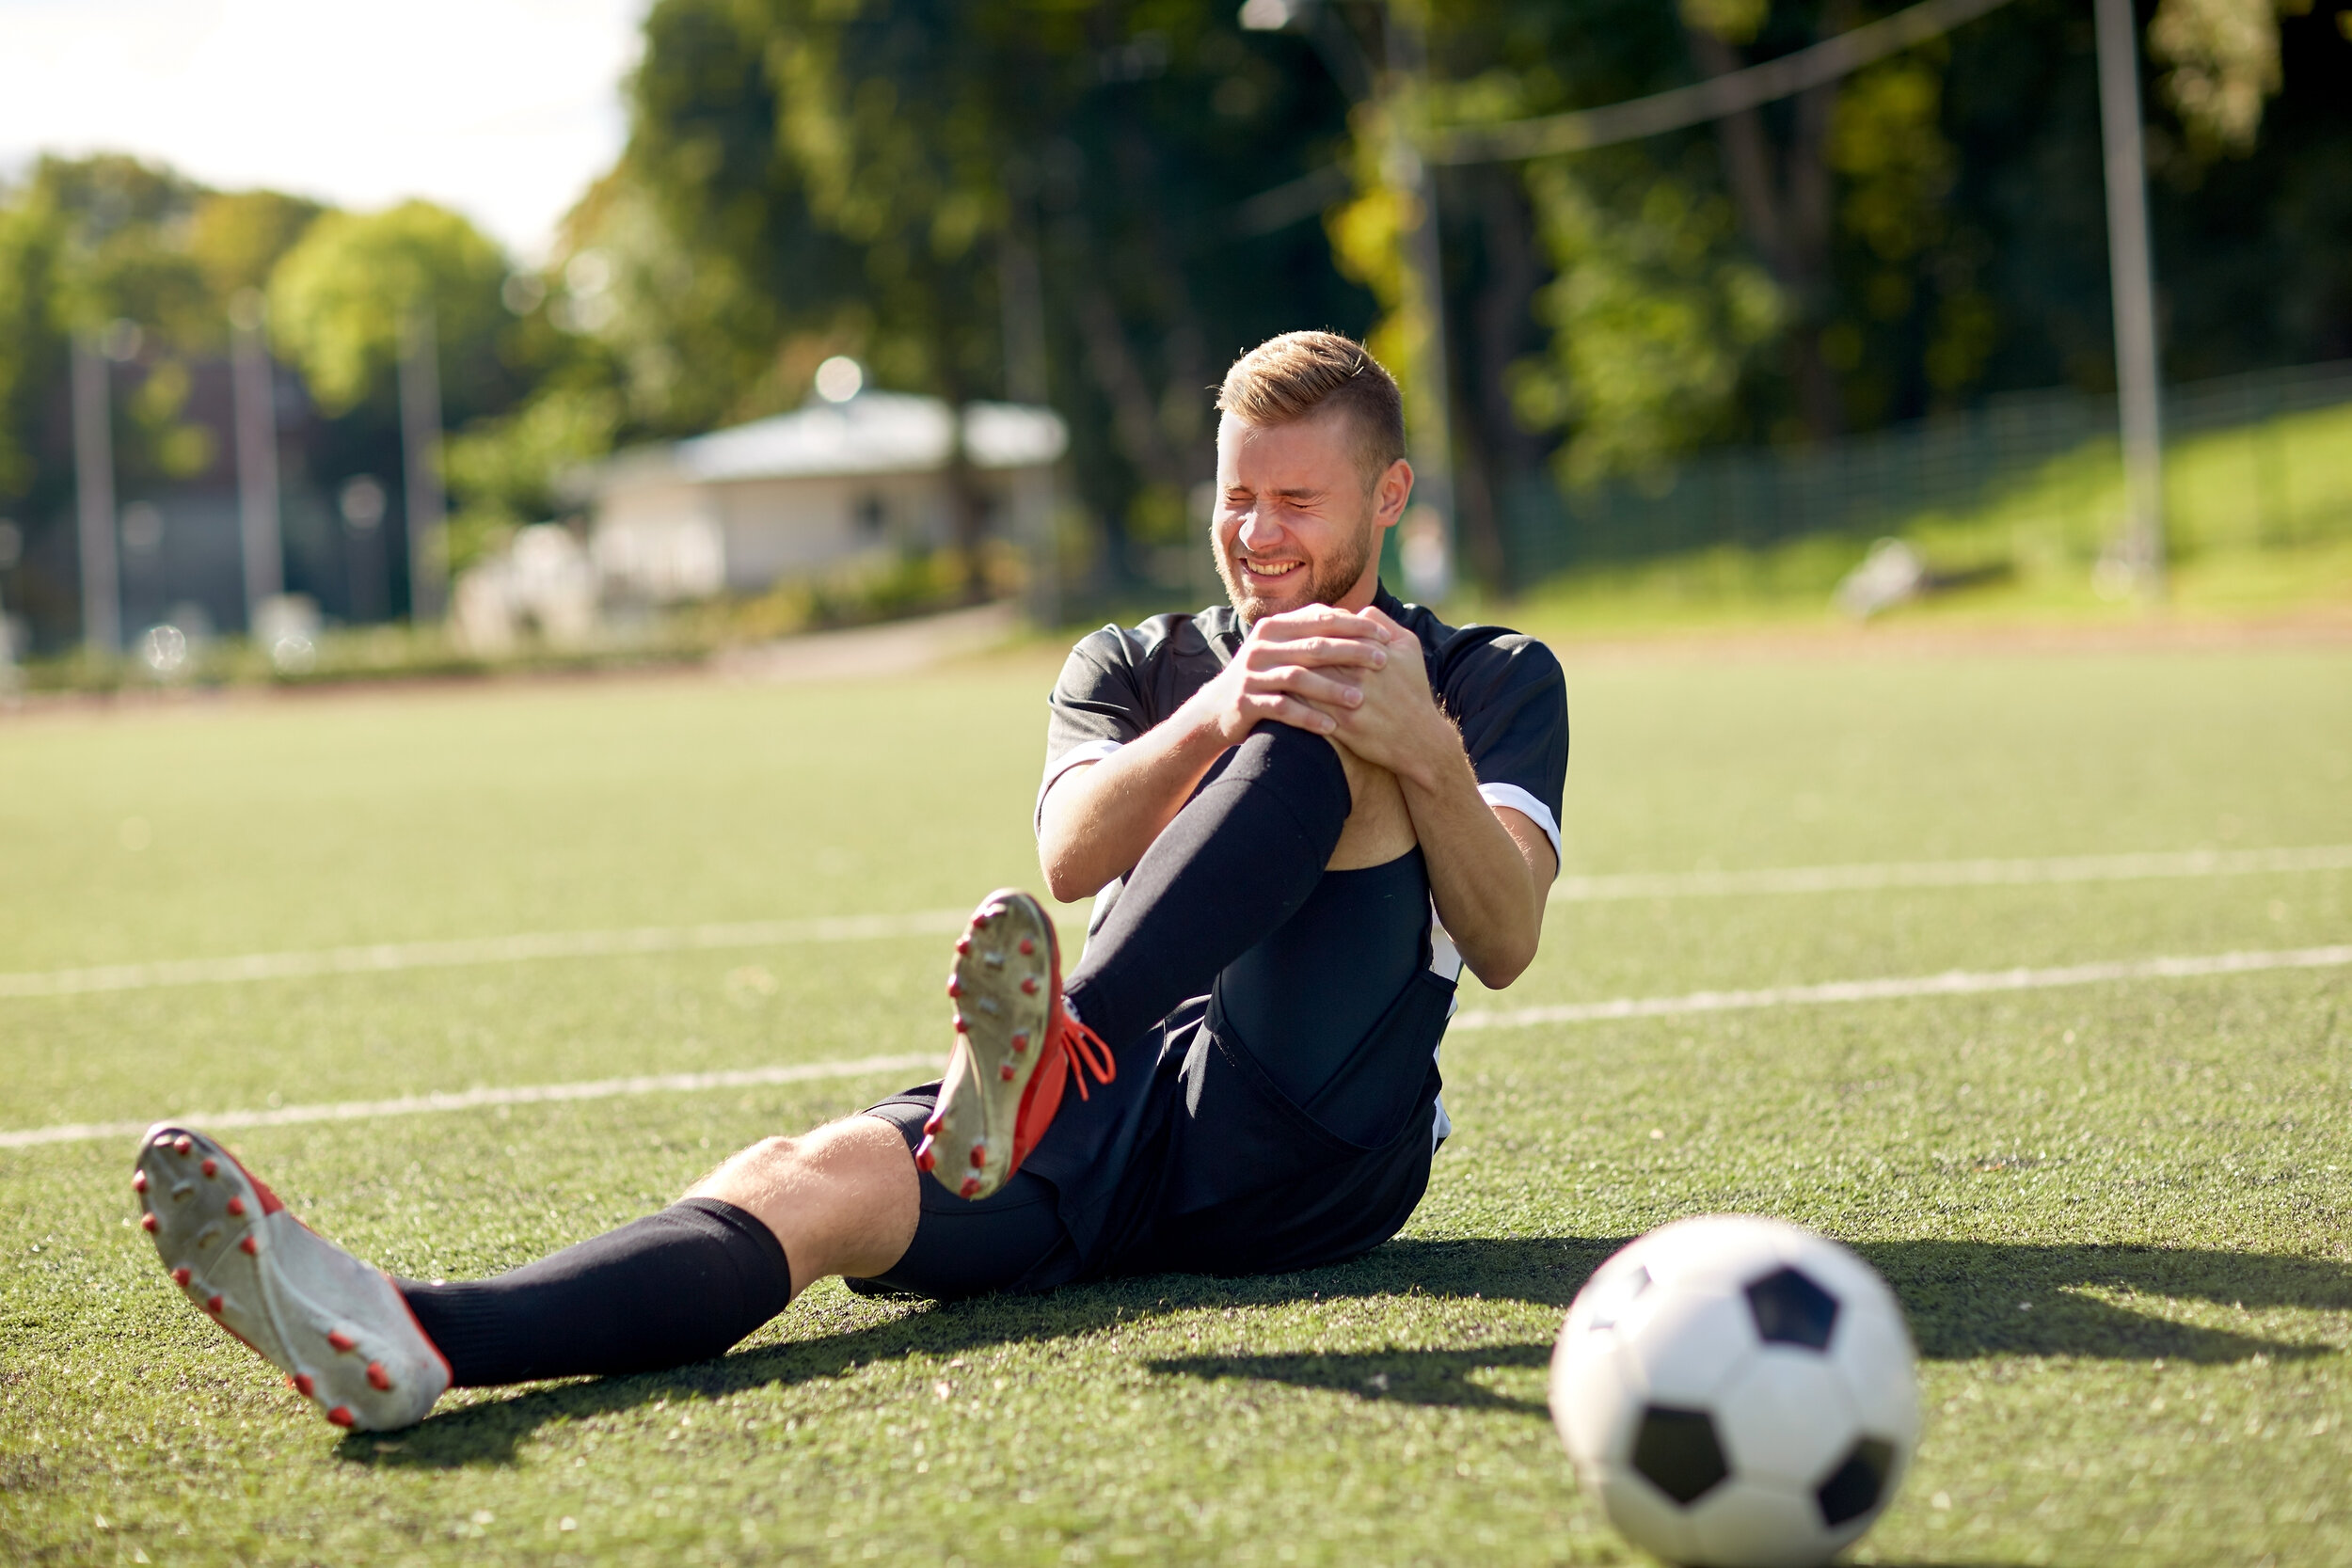 ACL injuries are common in contact AND non-contact sports